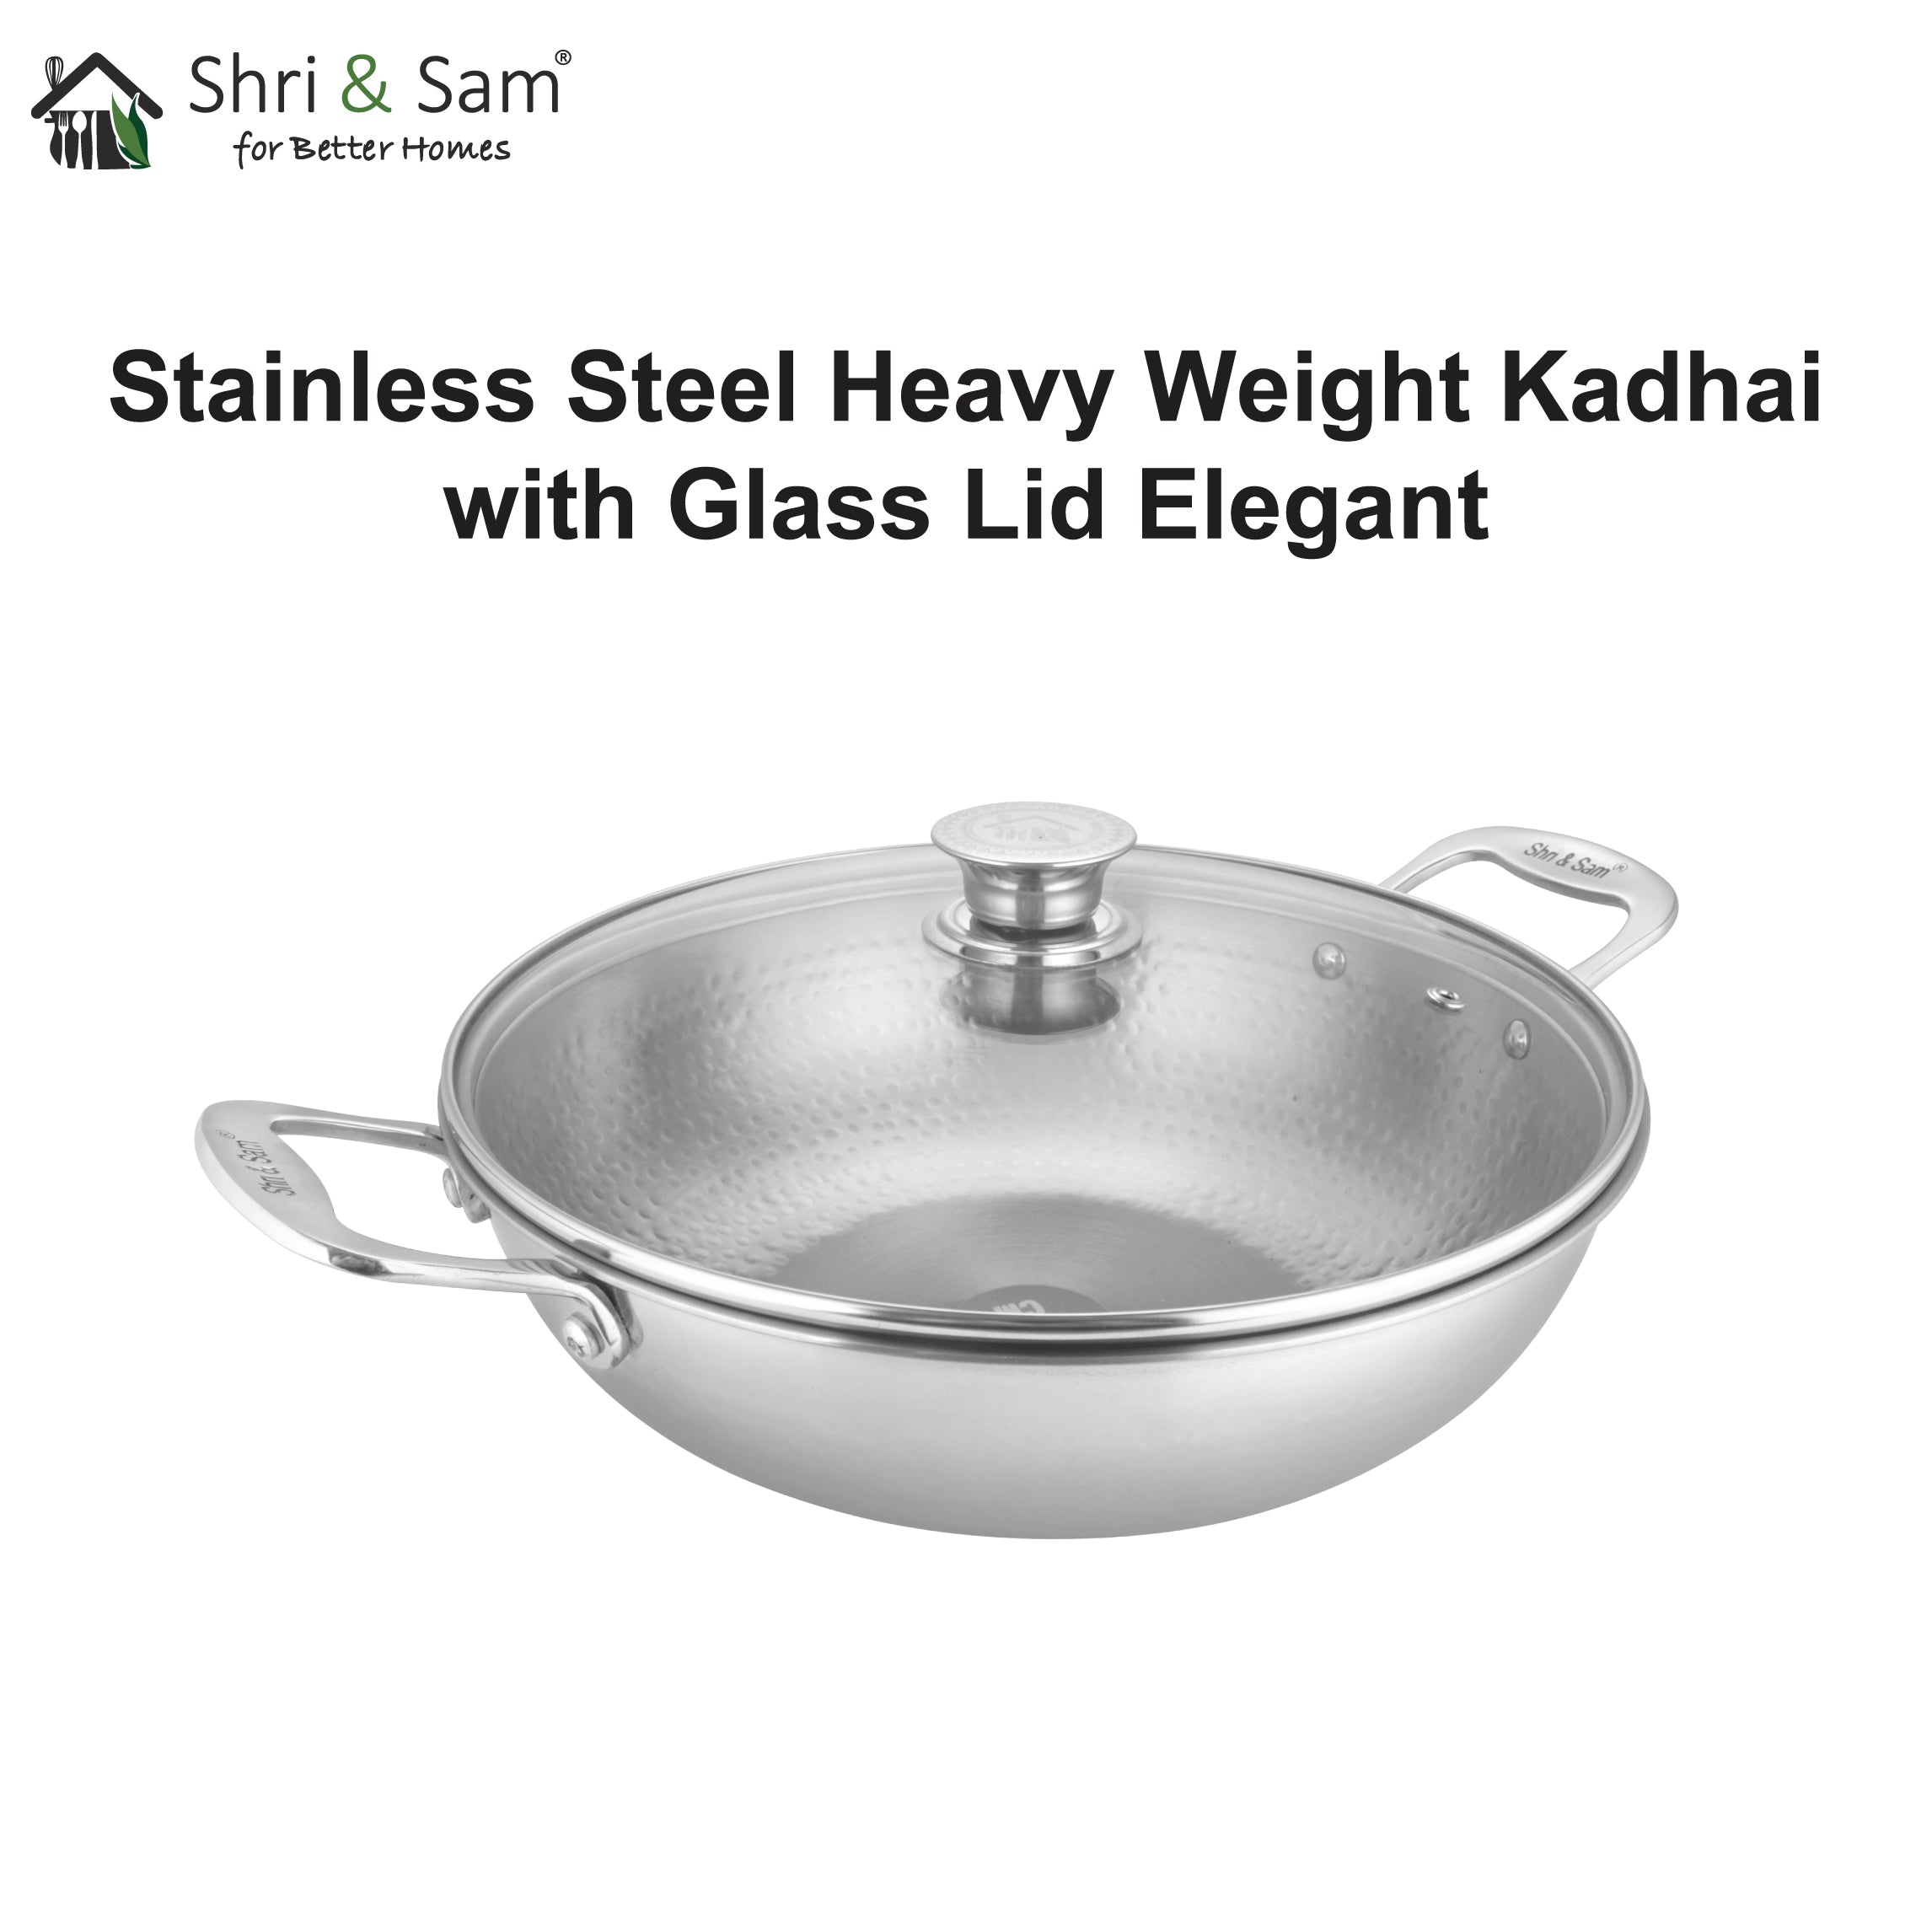 Stainless Steel Heavy Weight Hammered Kadhai with Glass Lid Elegant